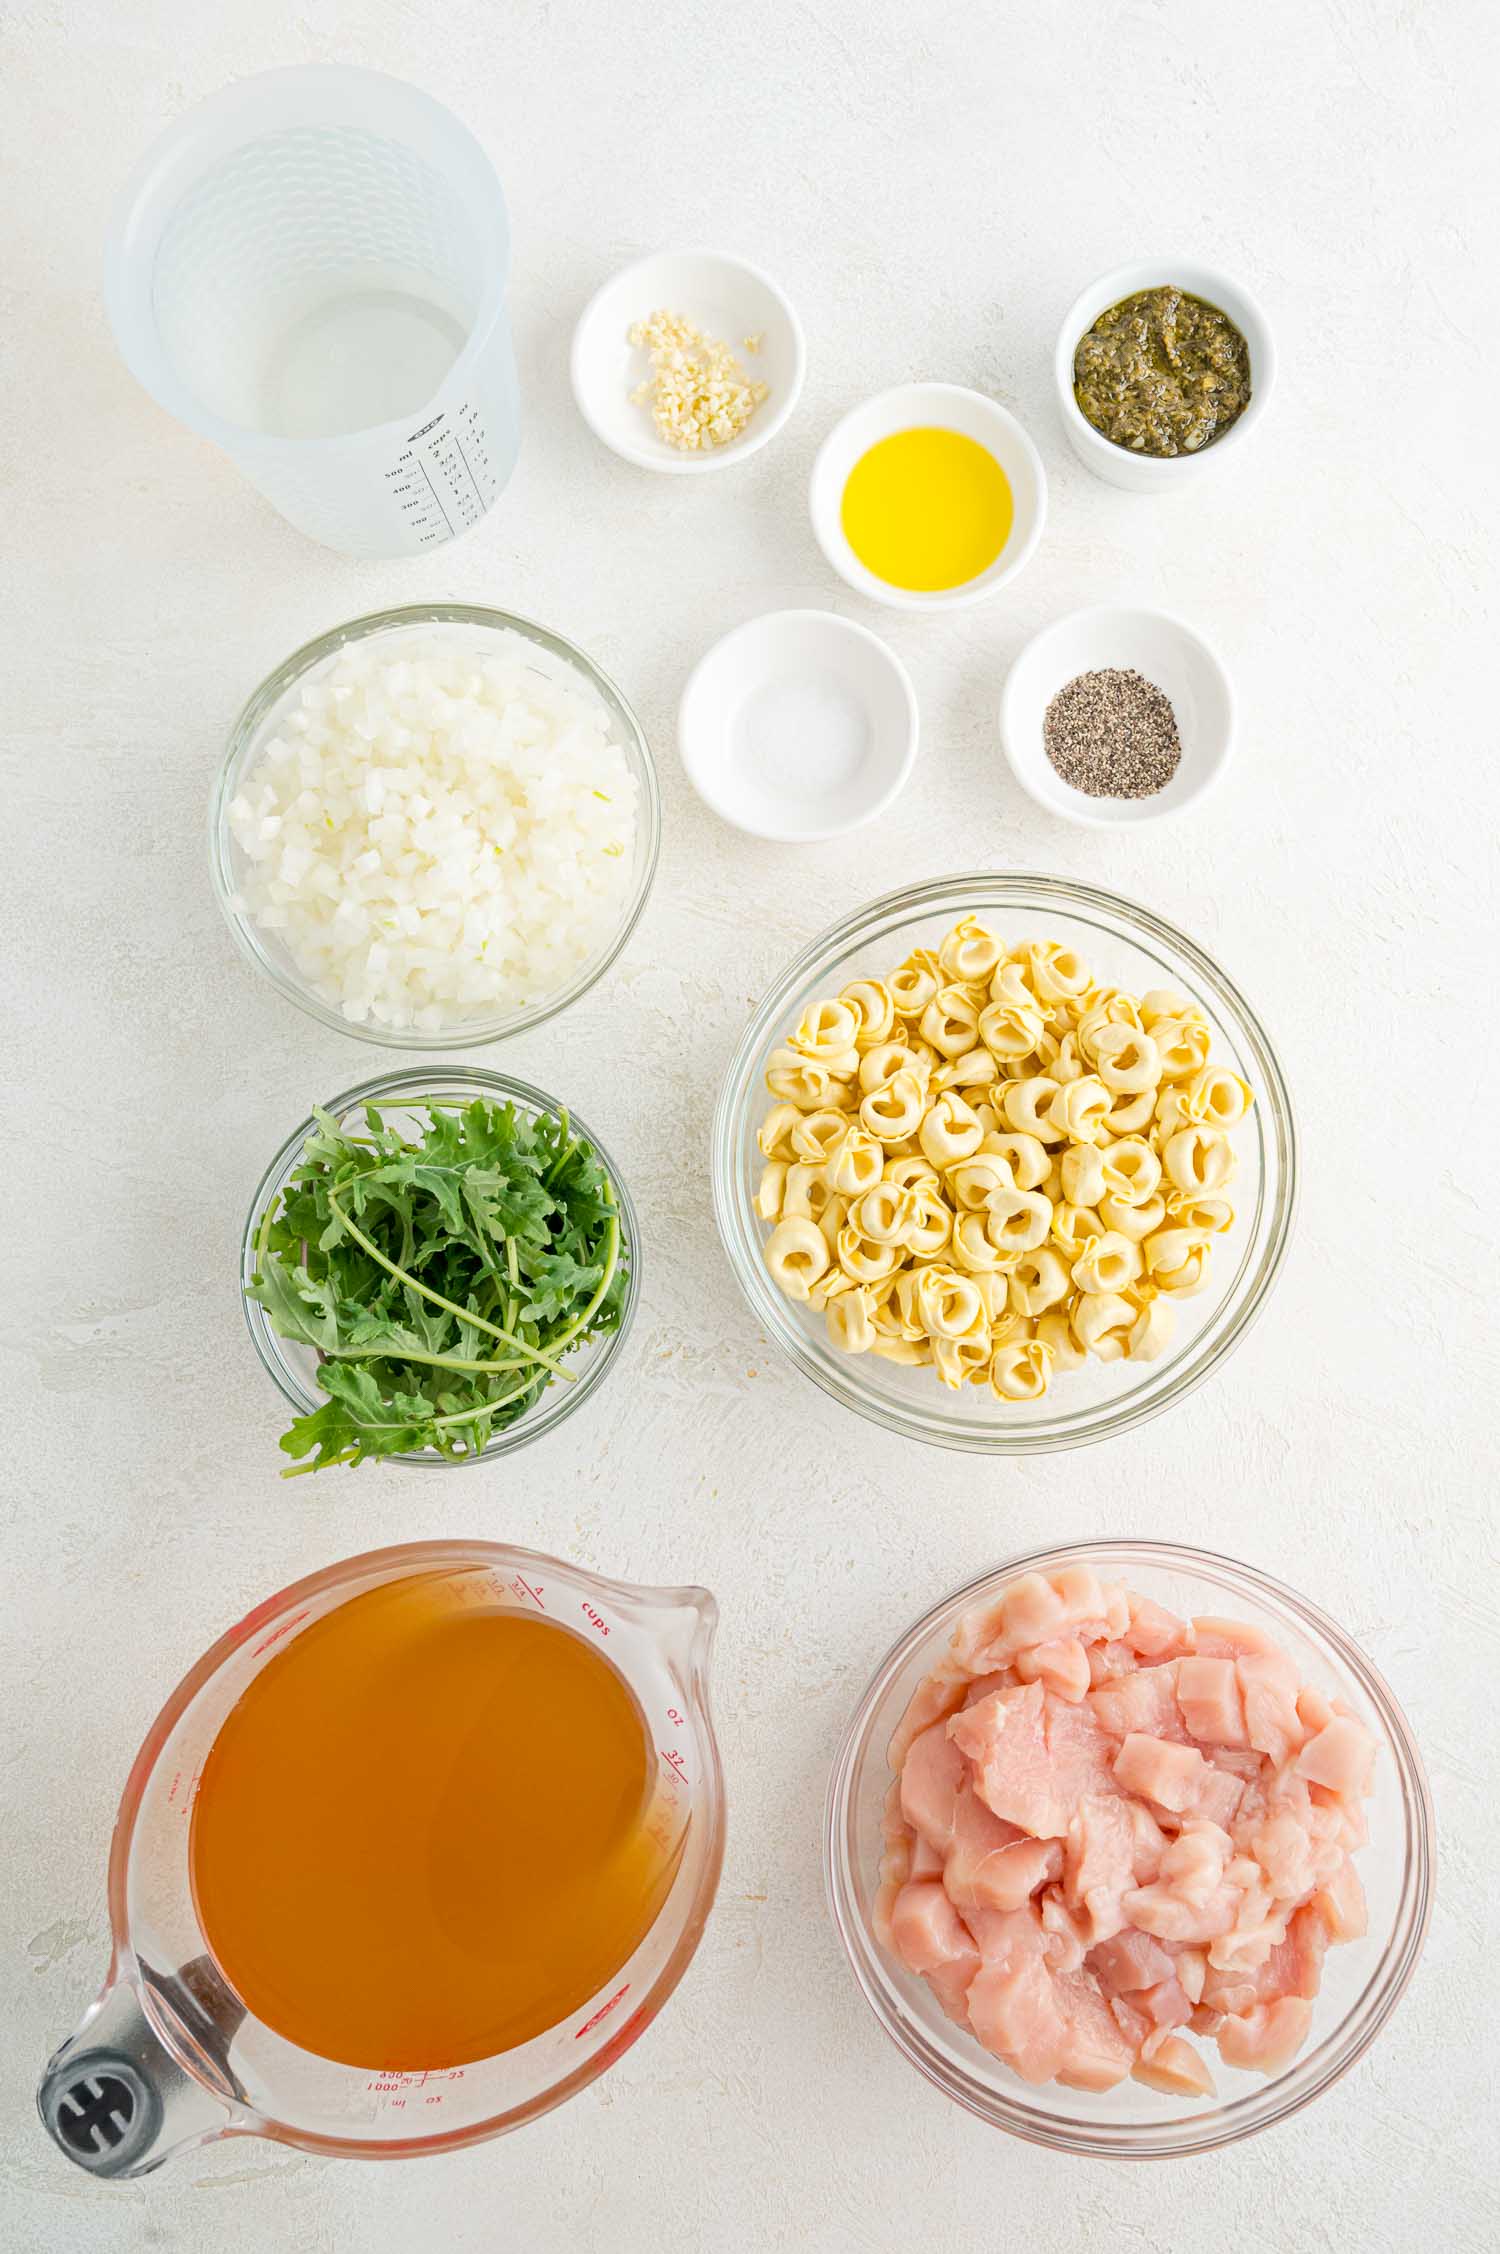 Ingredients needed for soup, each in separate bowls.